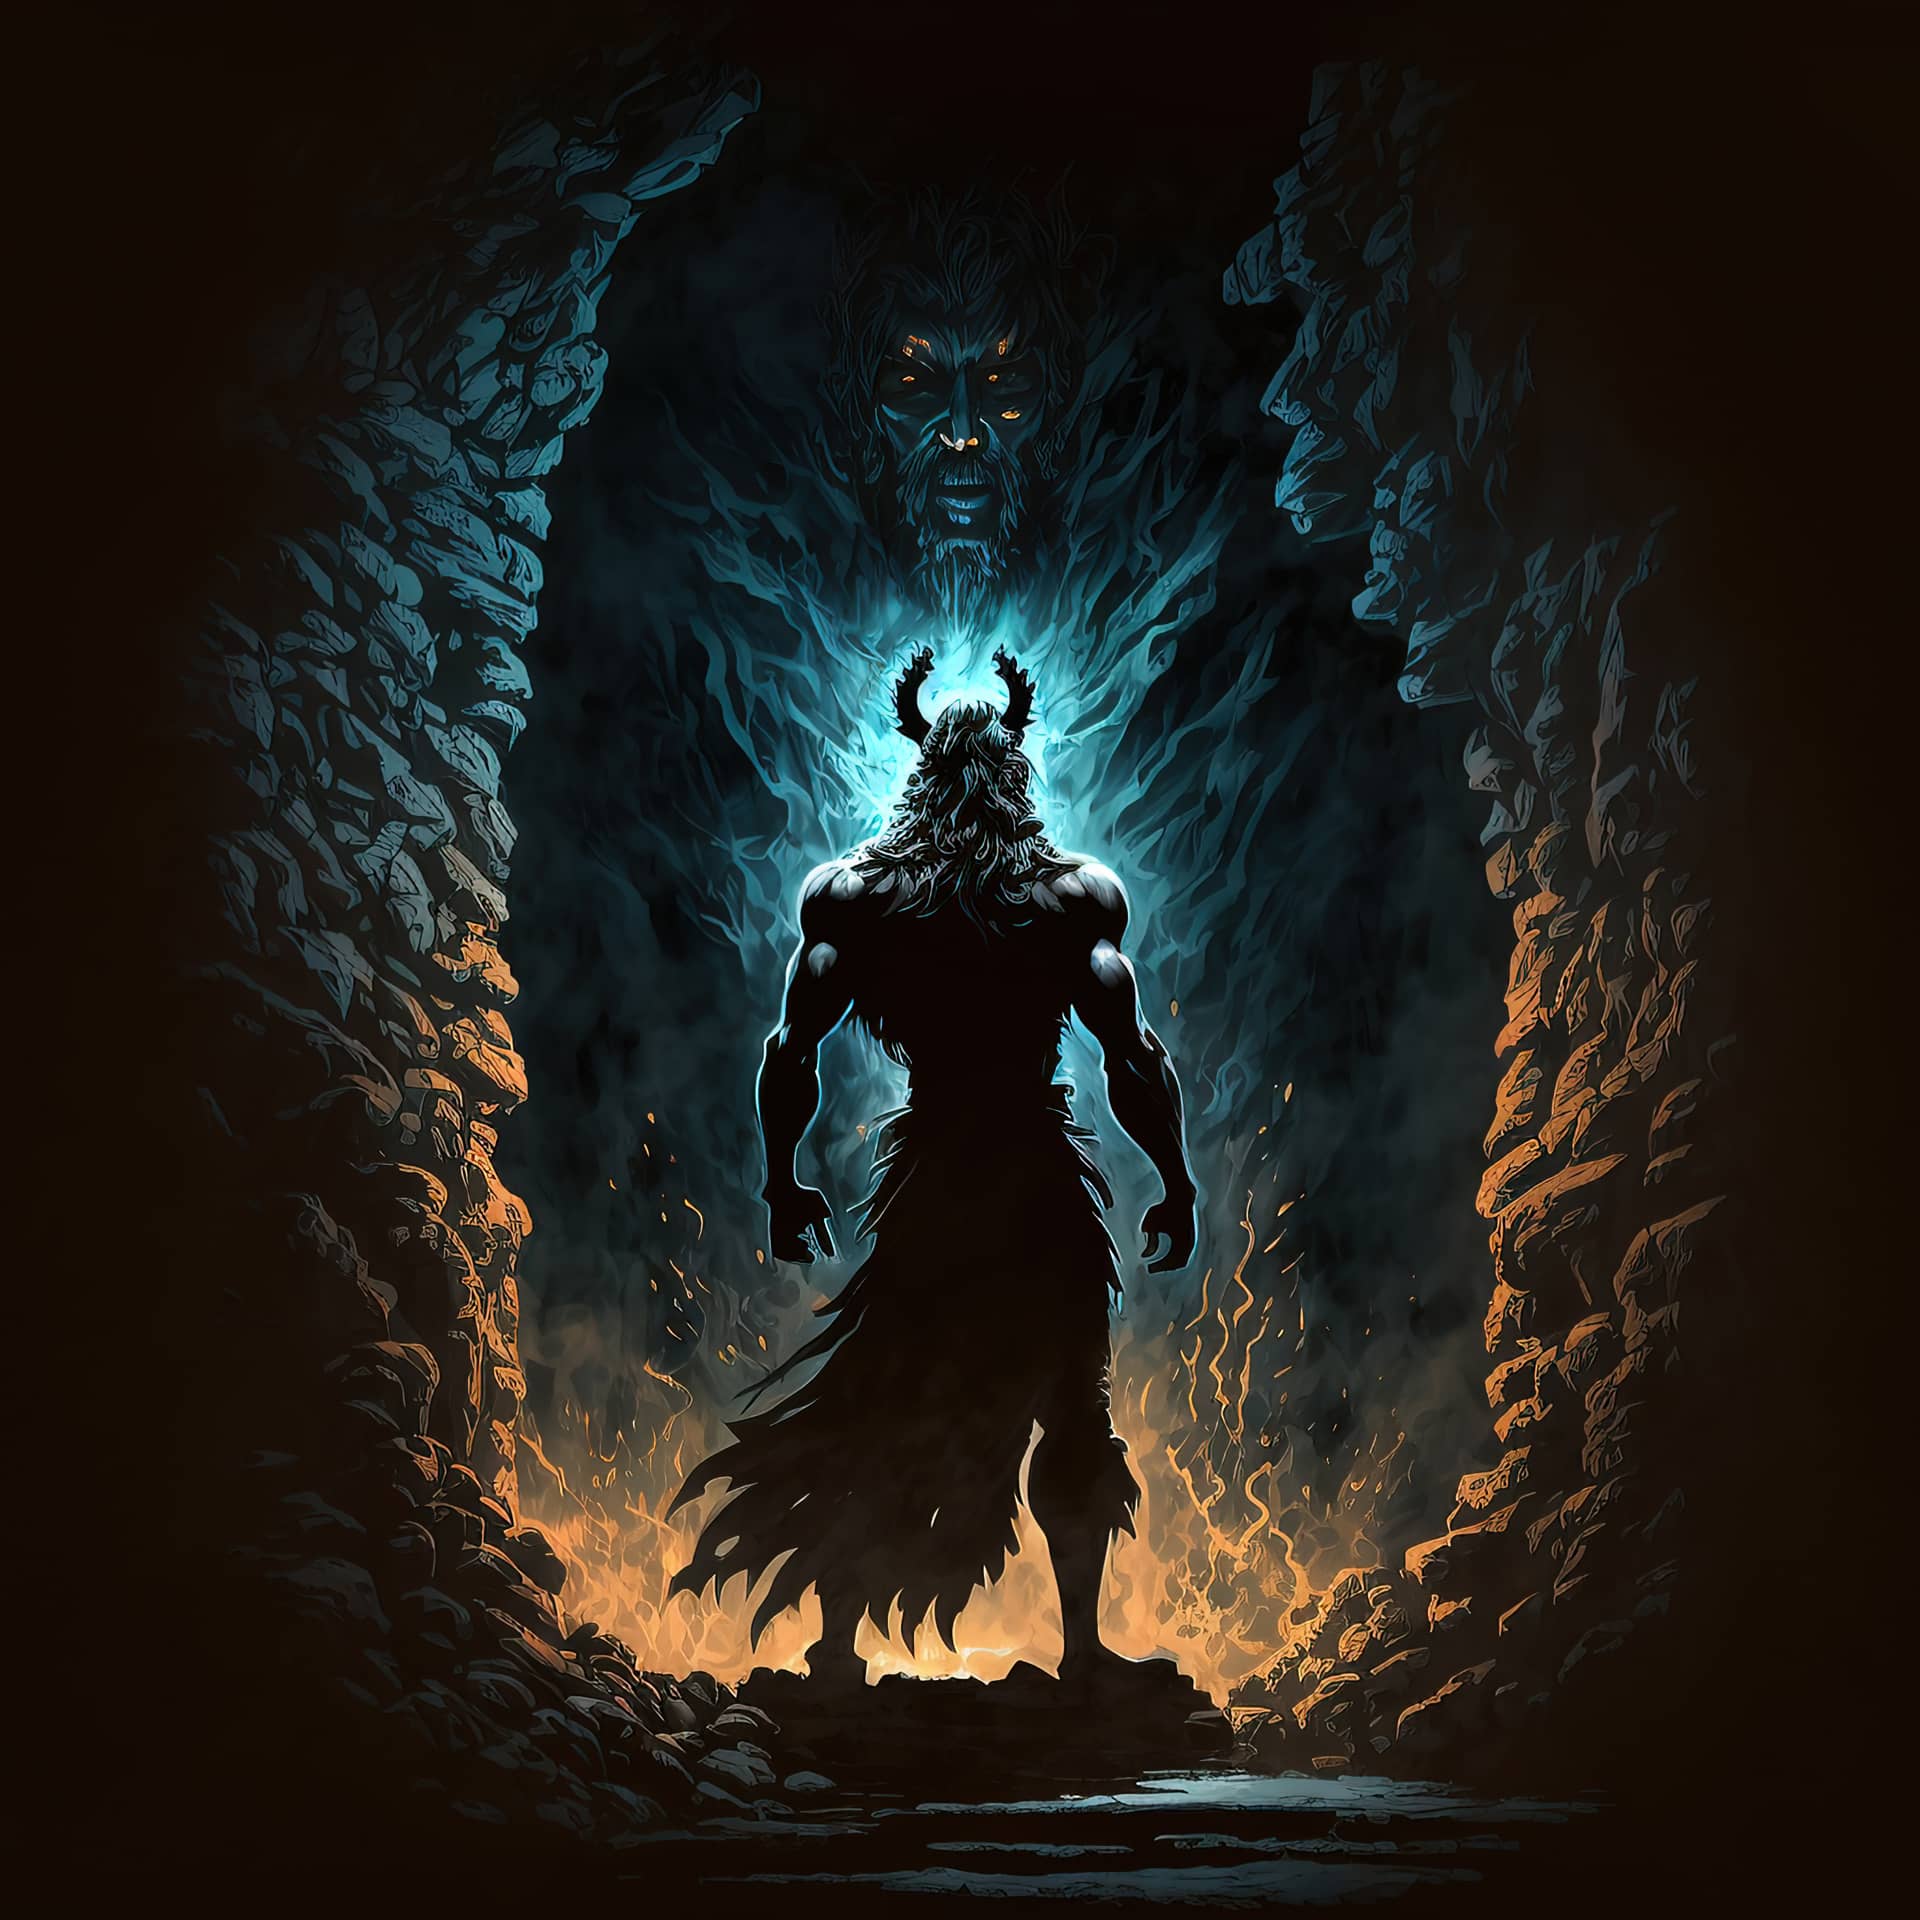 Hades stands full growth cave king underworld god dead image